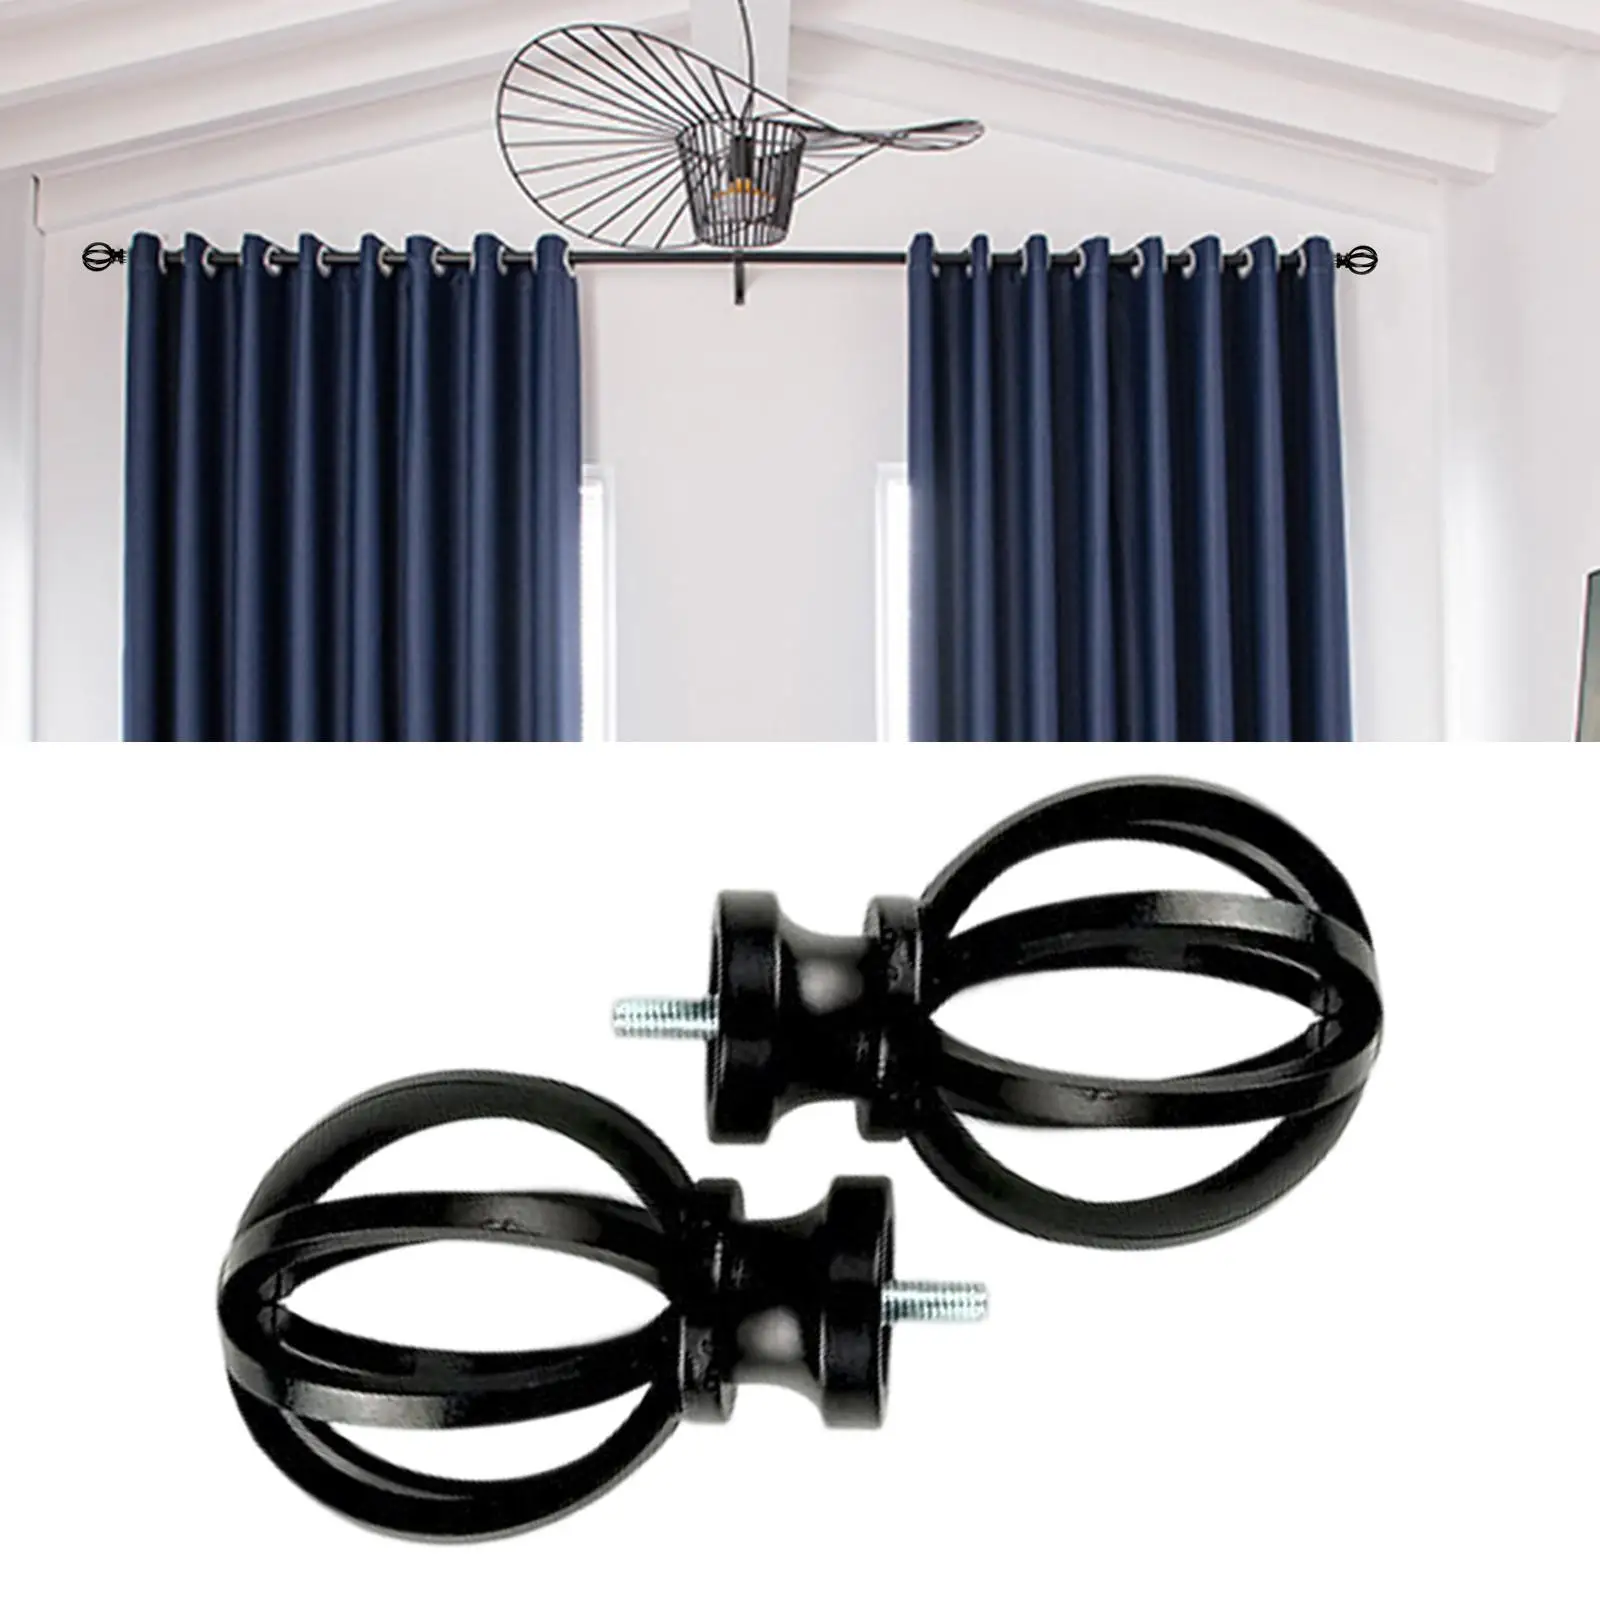 2x Cage Curtain Rod Finials 5/8 inch Diameter Decoration Hardware Vintage Drapery Rod Finials for Living Room Home Office